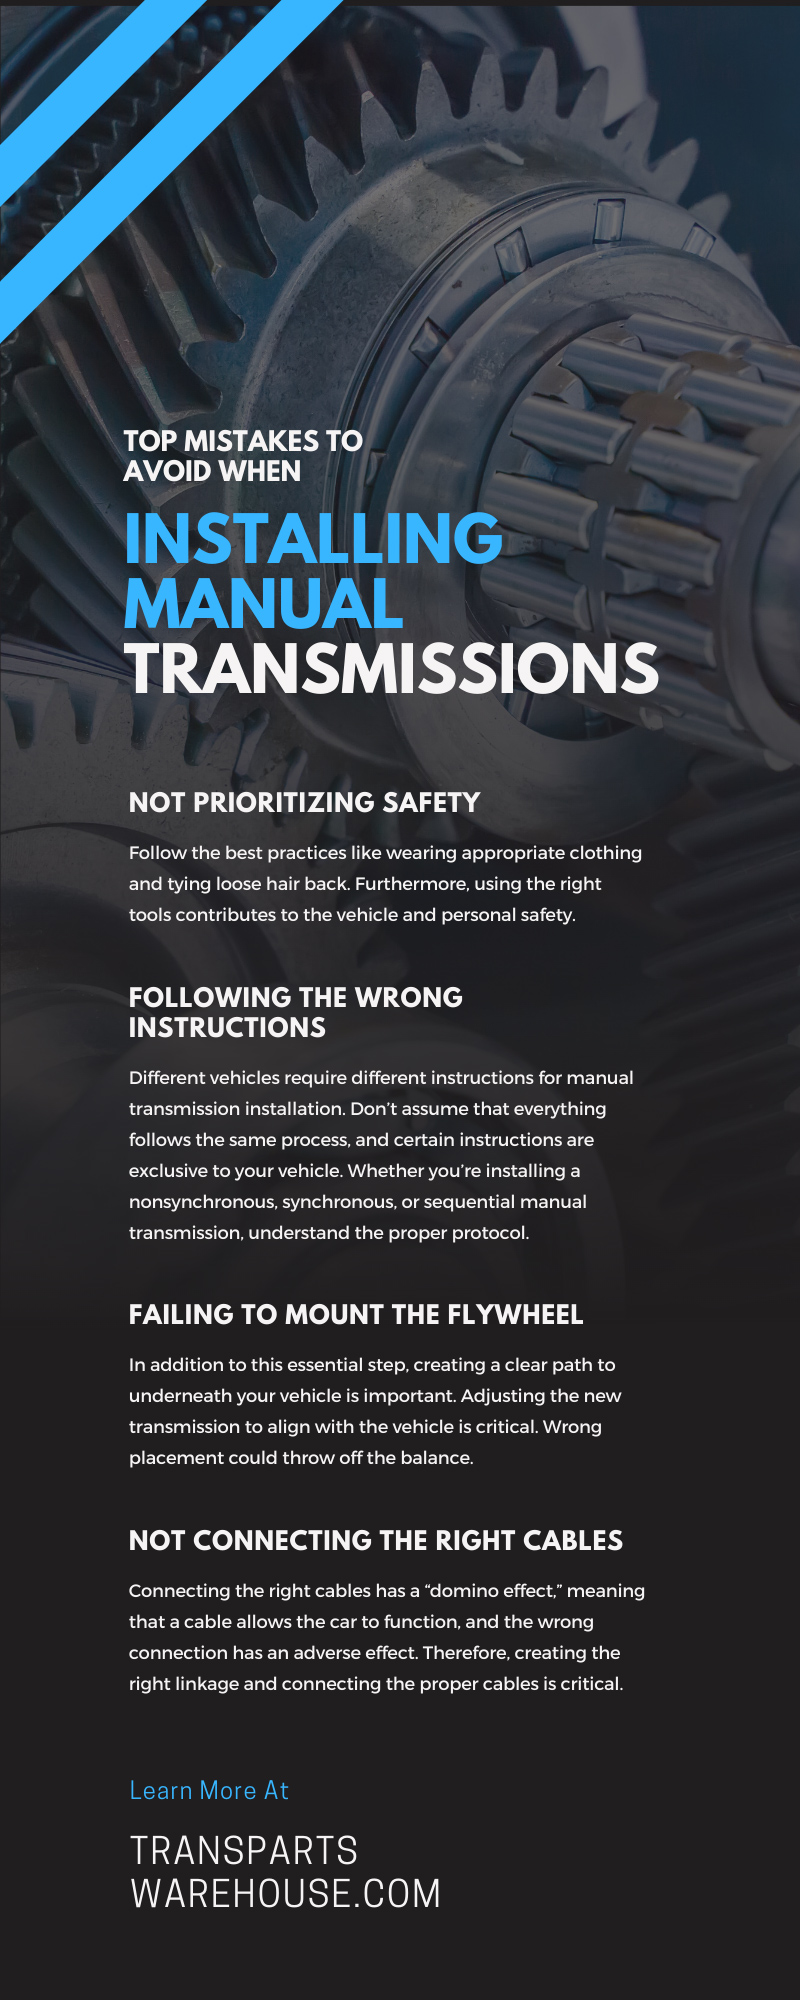 Top Mistakes To Avoid When Installing Manual Transmissions